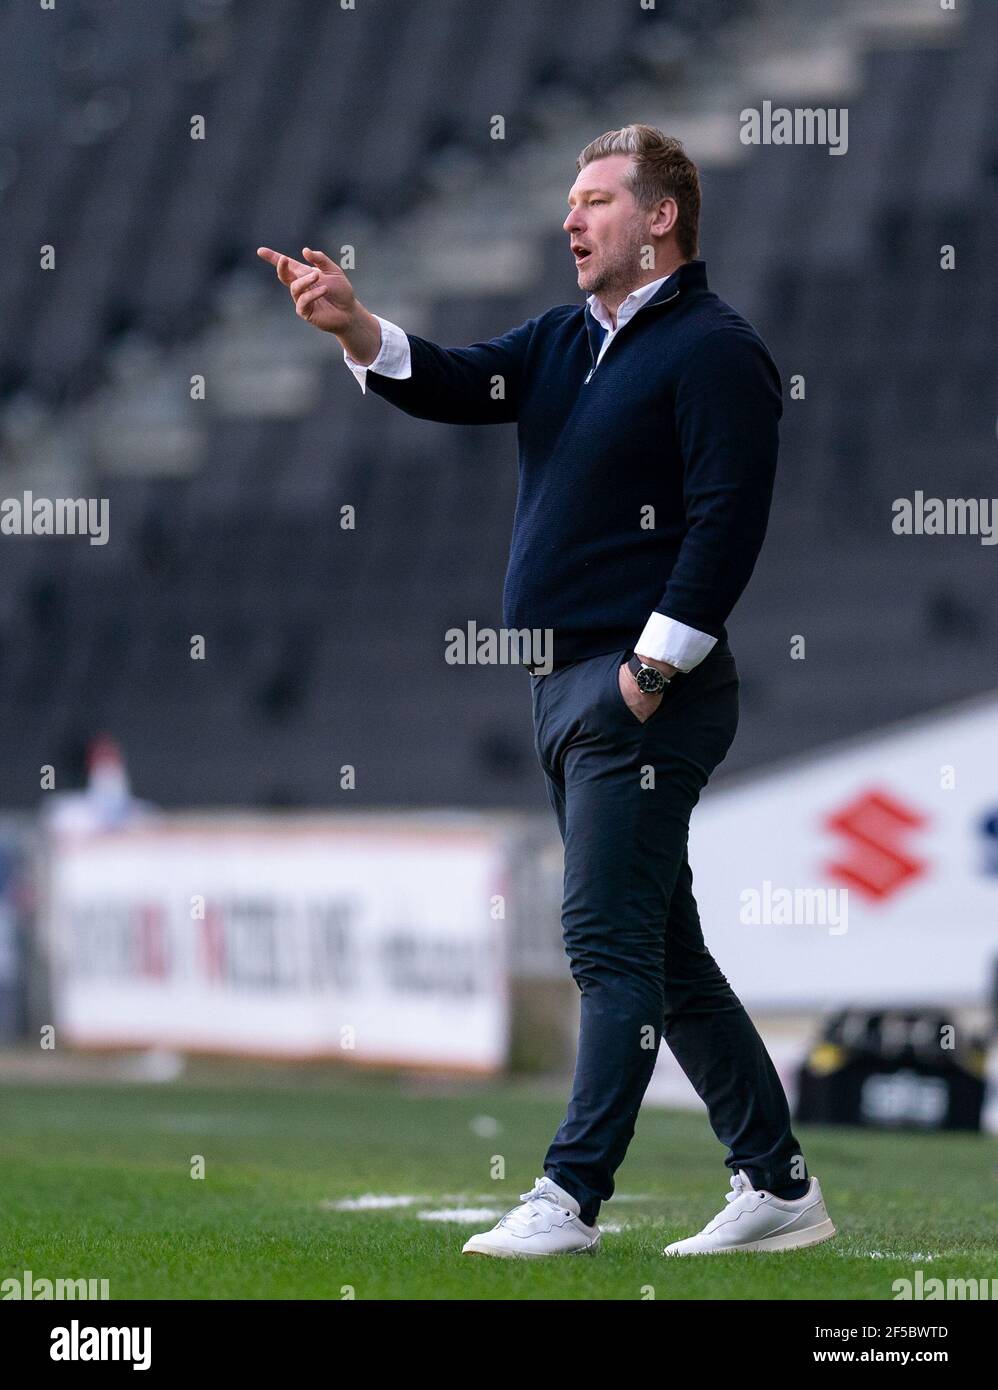 Oxford United manager Karl Robinson during the Sky Bet League 1 behind closed doors match between MK Dons and Oxford United at stadium:mk, Milton Keyn Stock Photo